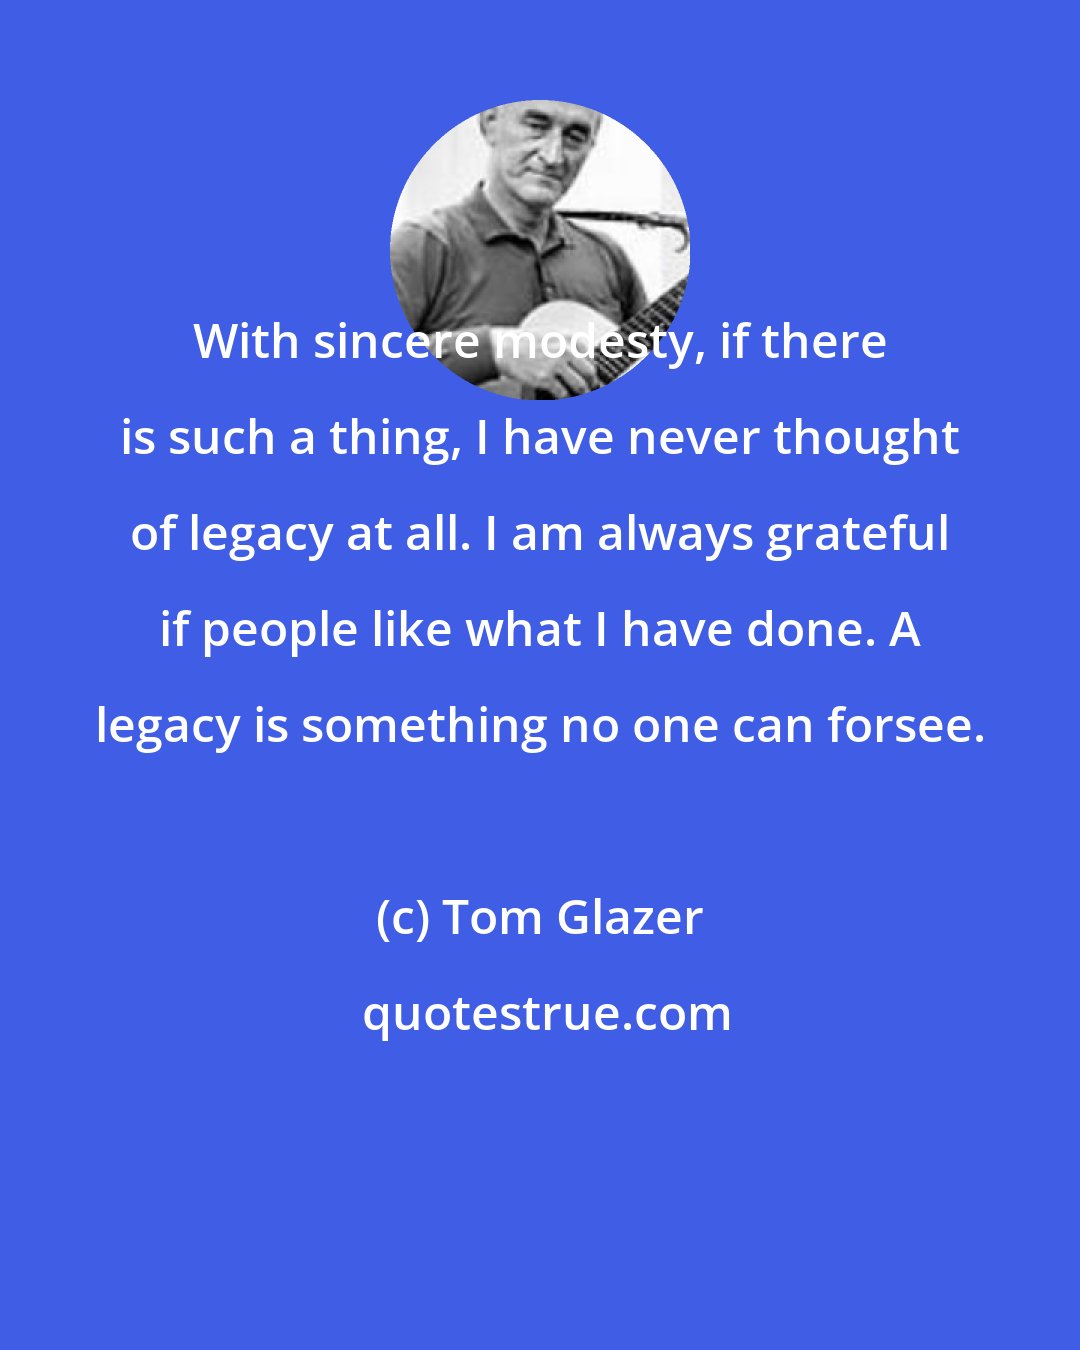 Tom Glazer: With sincere modesty, if there is such a thing, I have never thought of legacy at all. I am always grateful if people like what I have done. A legacy is something no one can forsee.